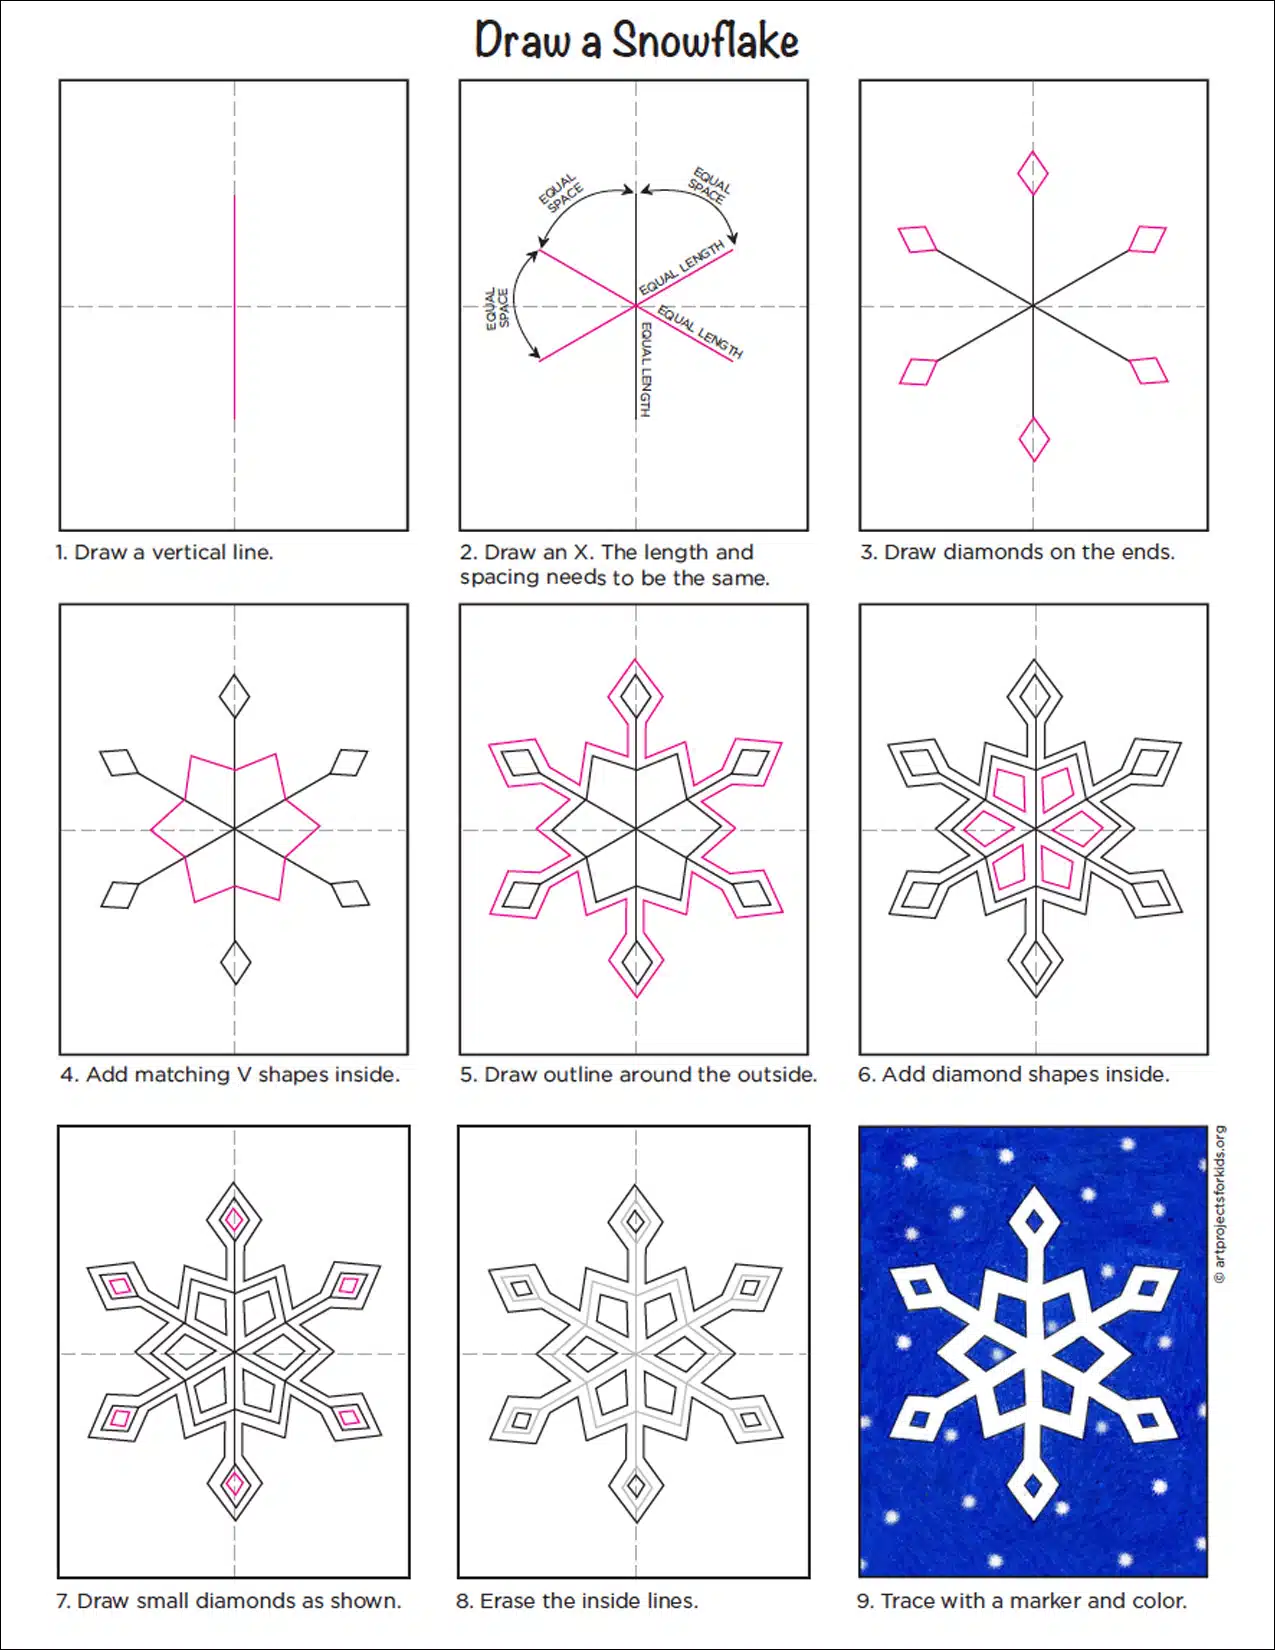 How to Draw a Snowflake 6 Easy ways VIDEO + Printable!